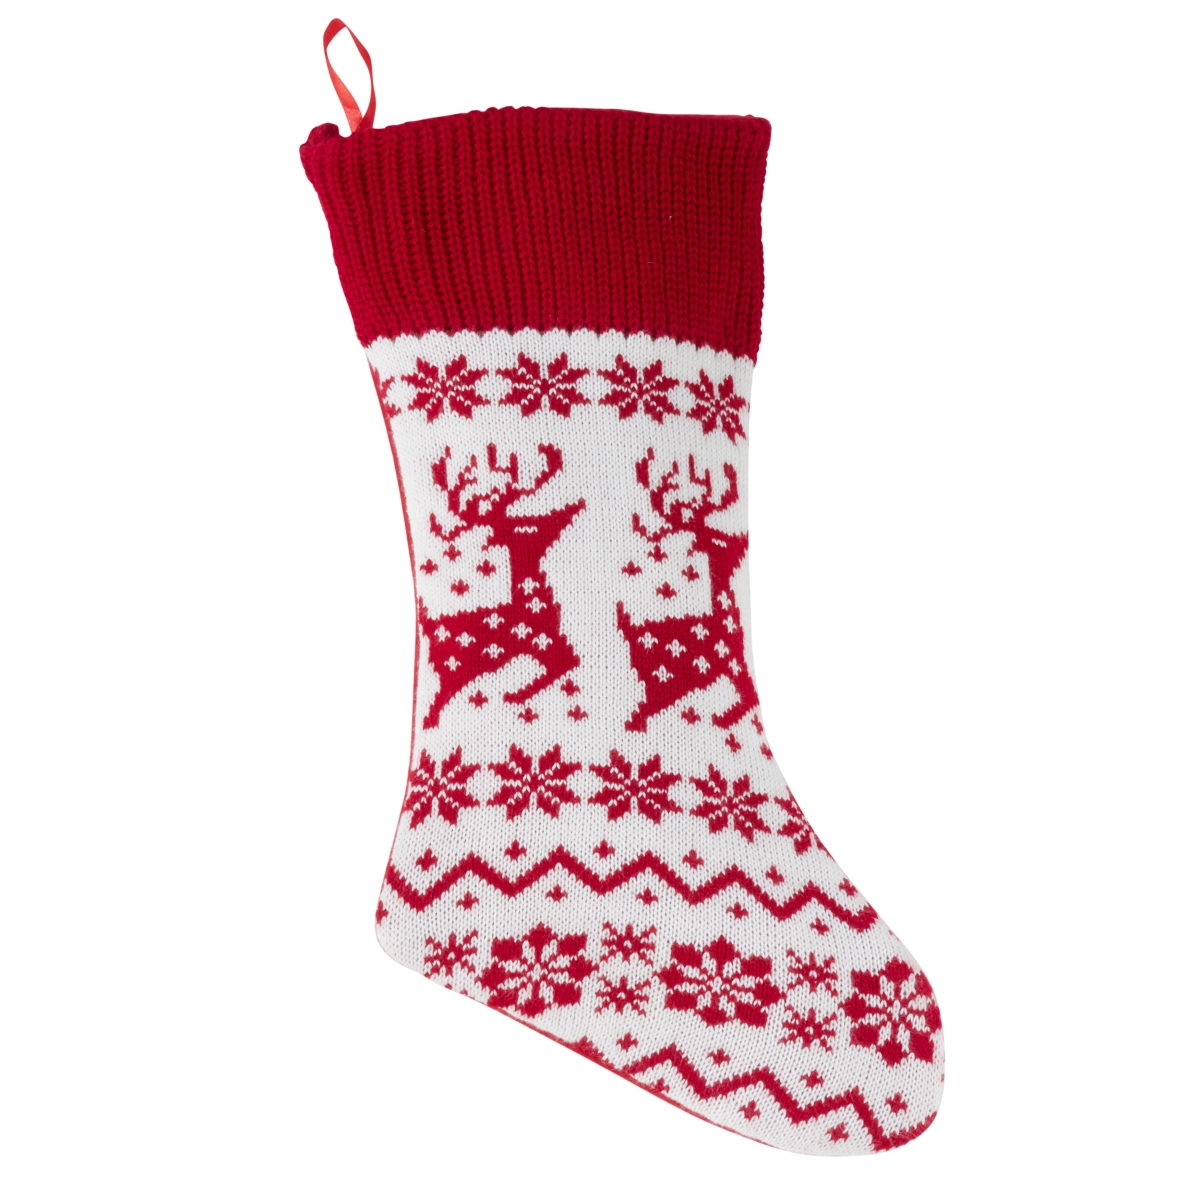 2060.r1720 Christmas Stocking Reindeer Sweater, Red & White